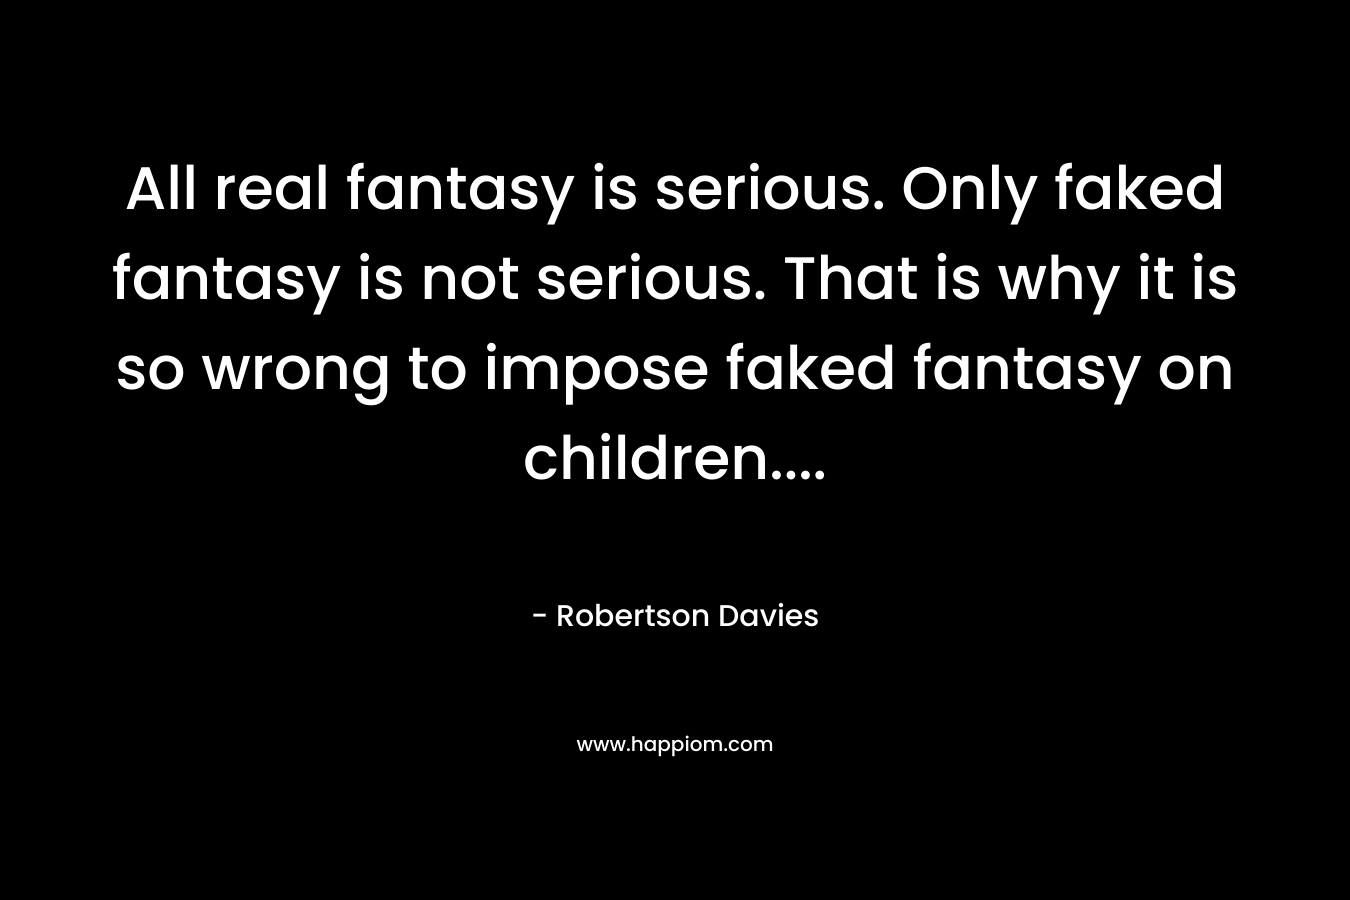 All real fantasy is serious. Only faked fantasy is not serious. That is why it is so wrong to impose faked fantasy on children....